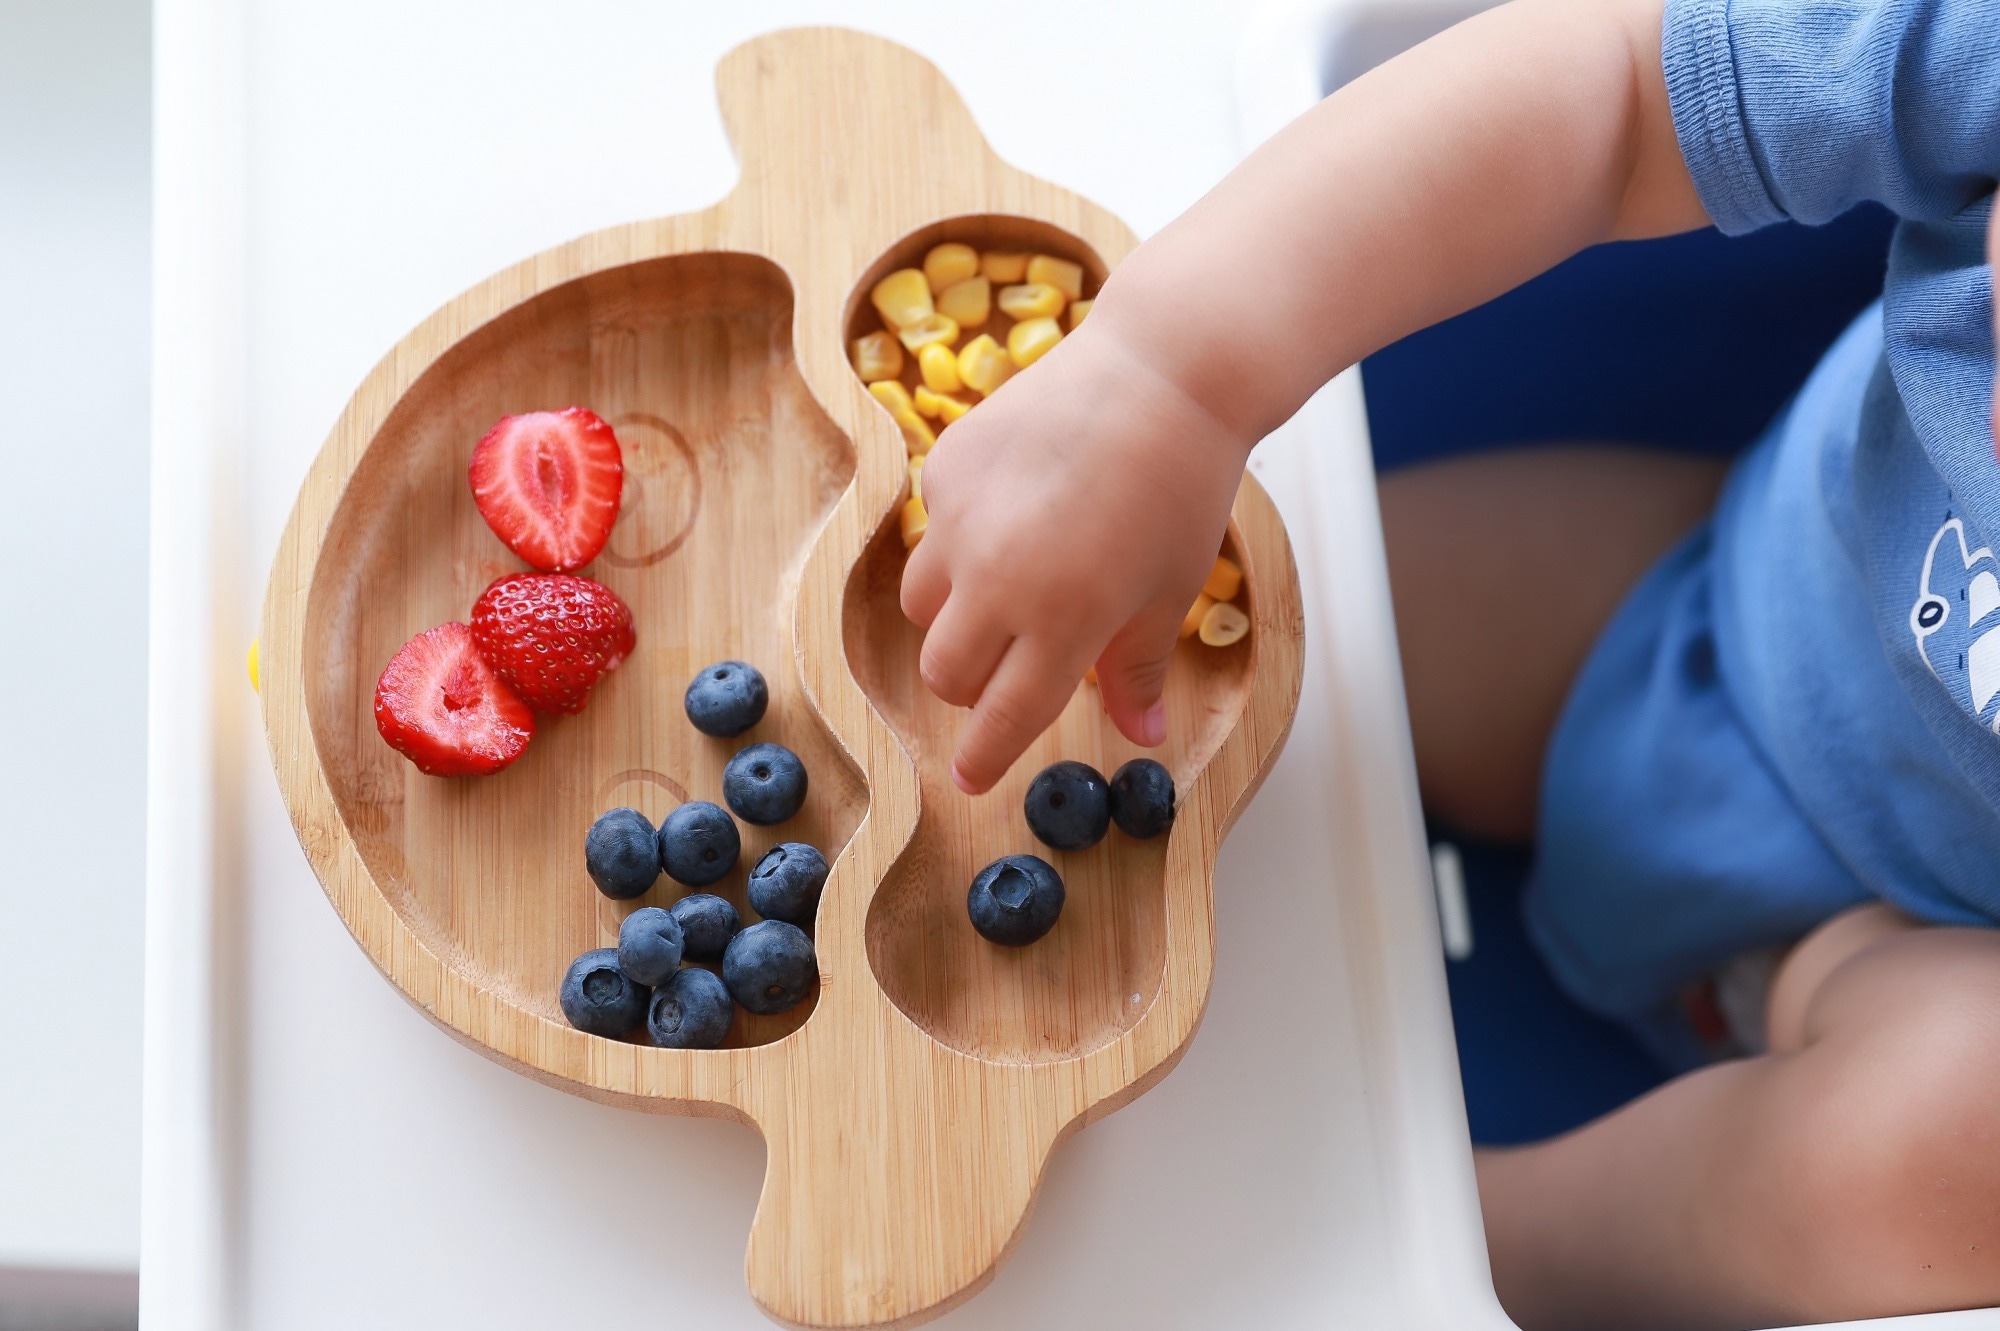 Study: Development of the Healthy Eating Index-Toddlers-2020. Image Credit: Onjira Leibe / Shutterstock.com